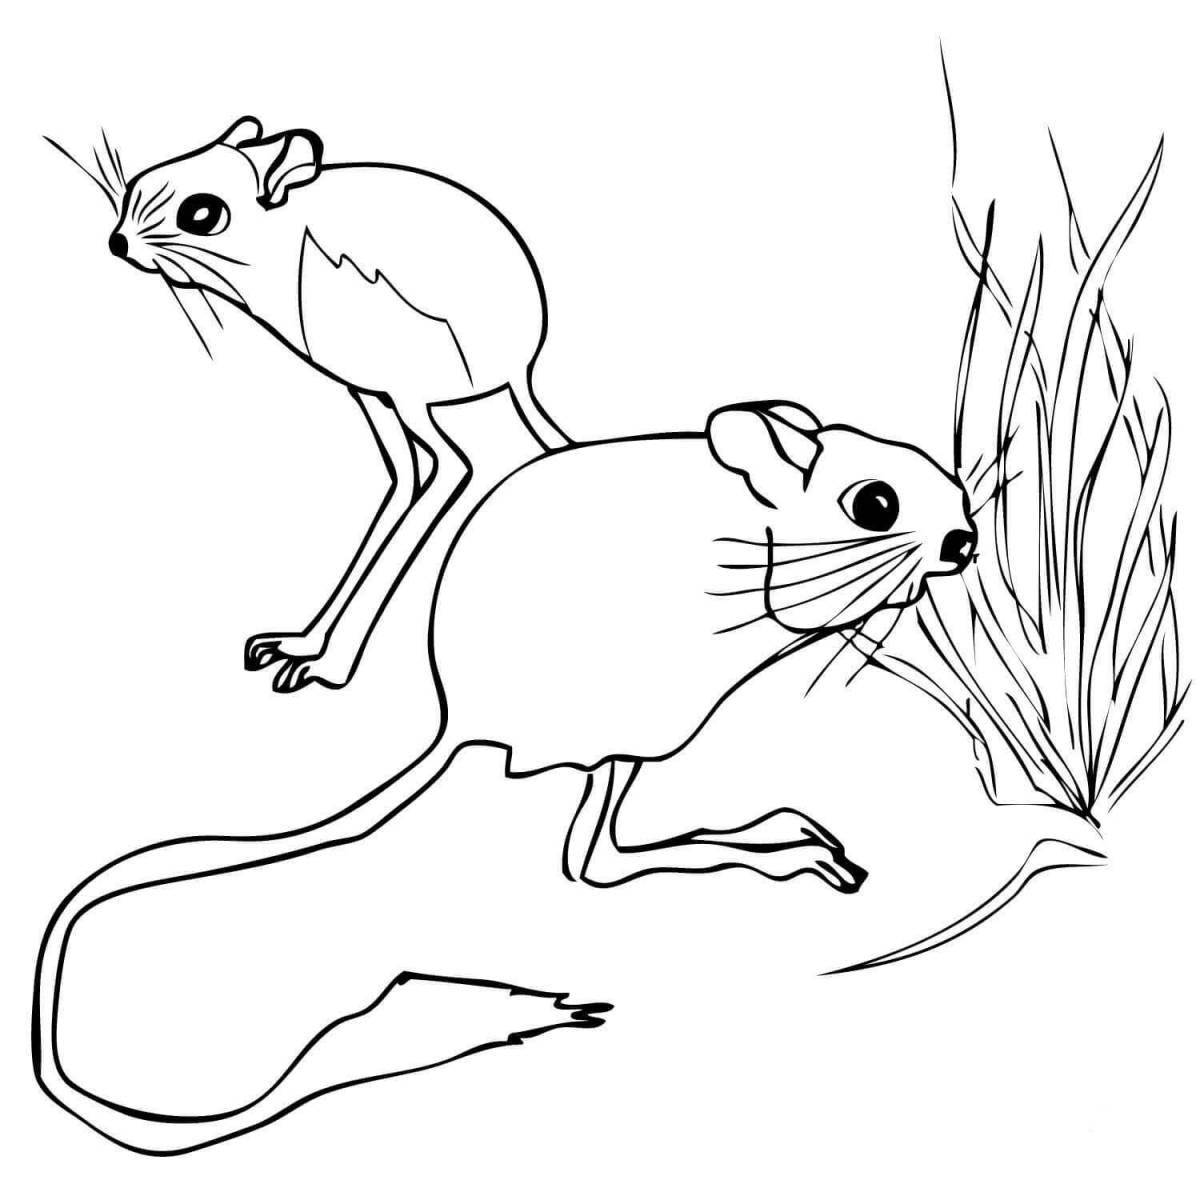 Colorful jerboa coloring page